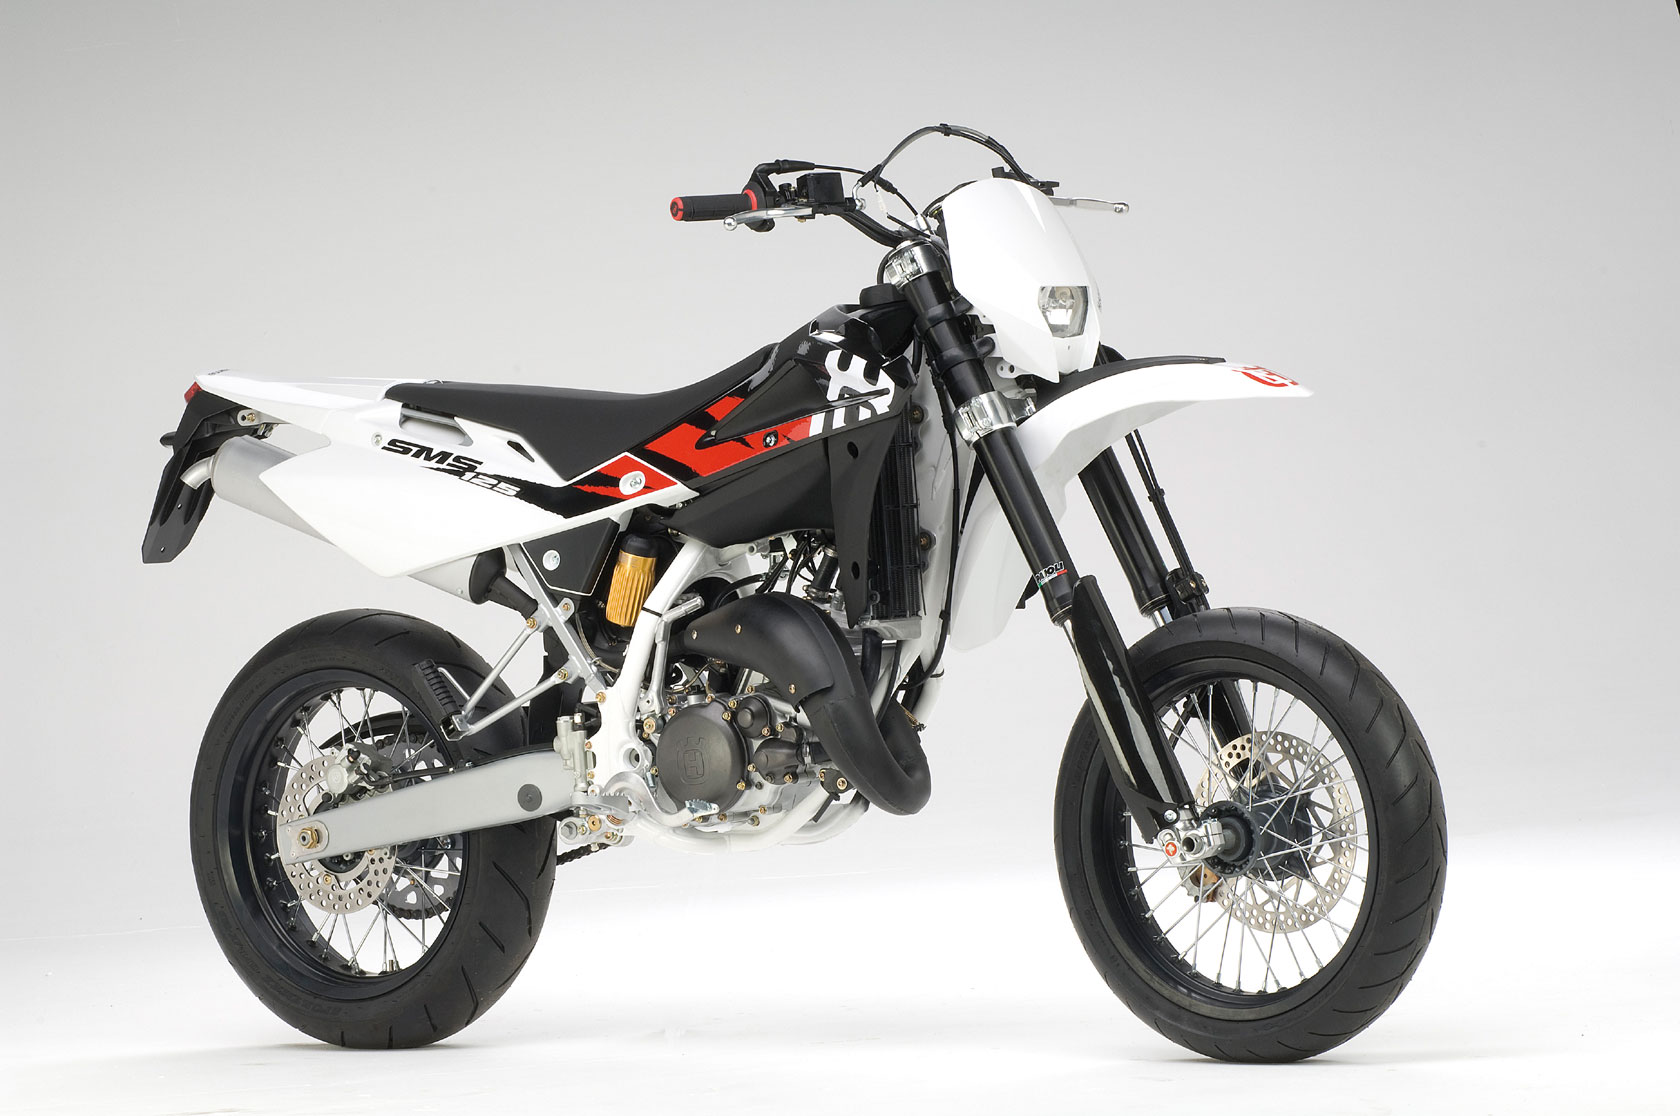 The SM 125 has become an icon for sixteen-year-olds, a sales phenomenon and